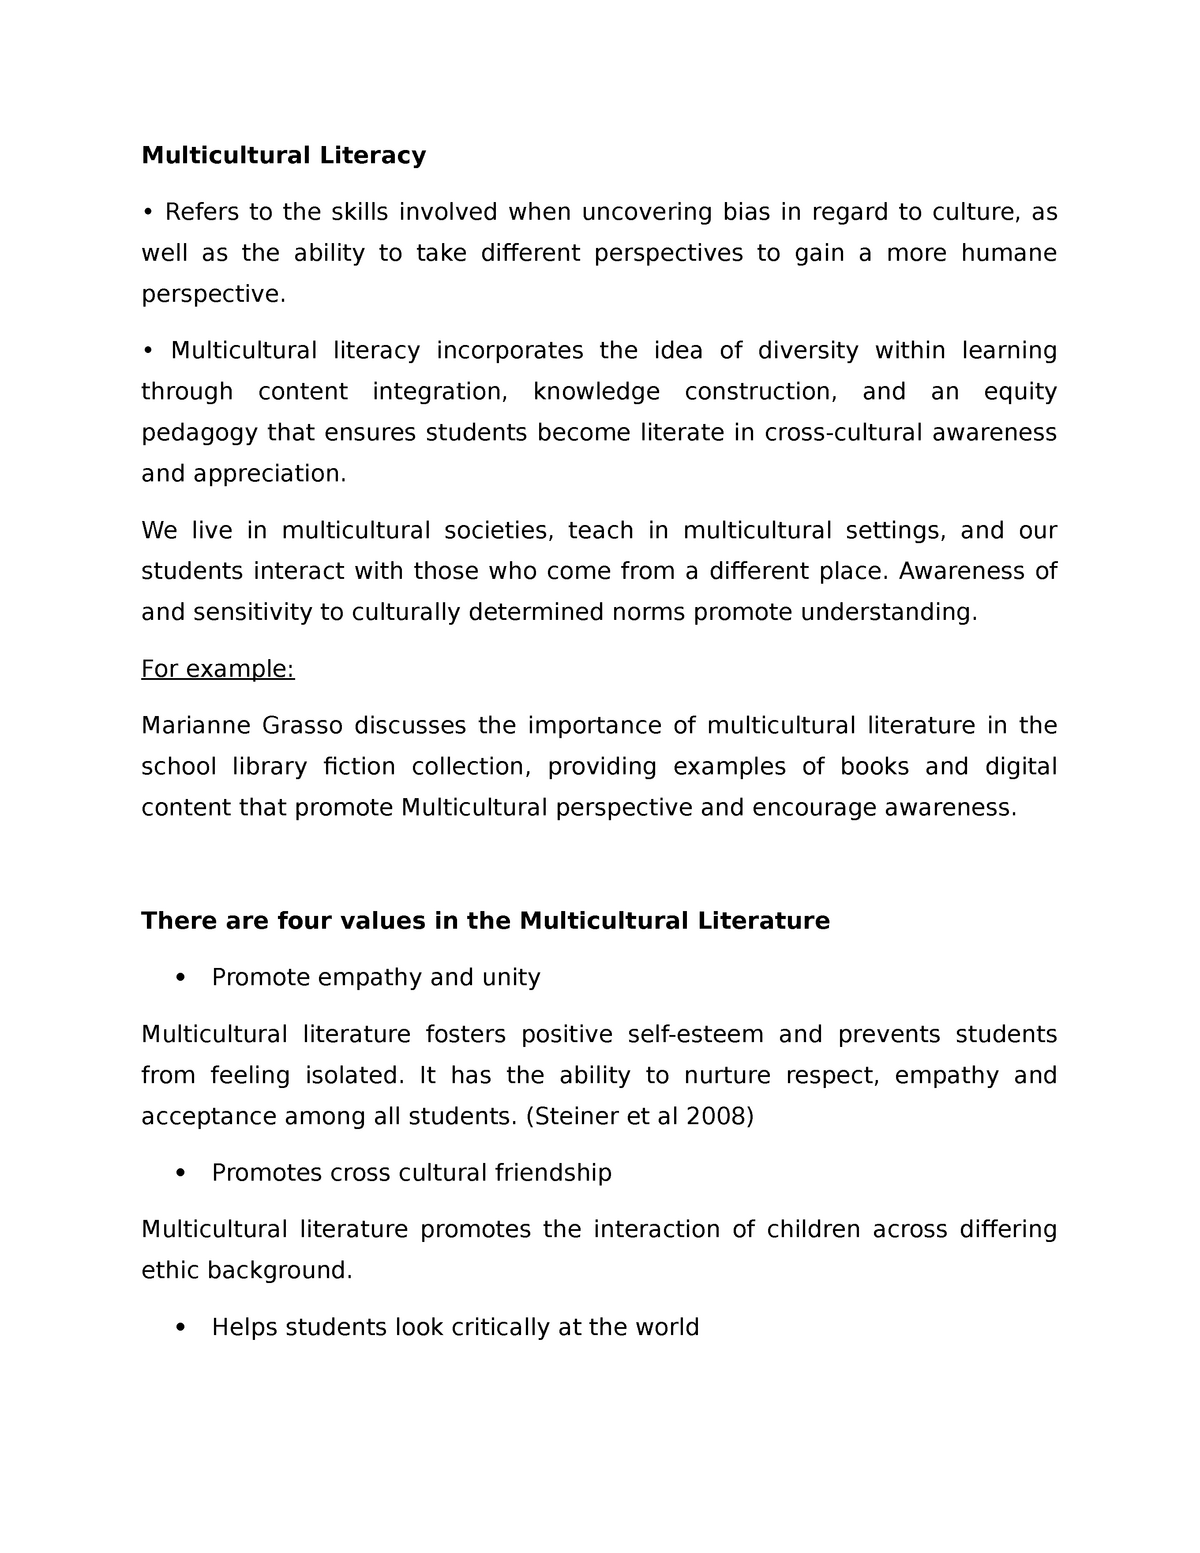 multicultural literacy essay